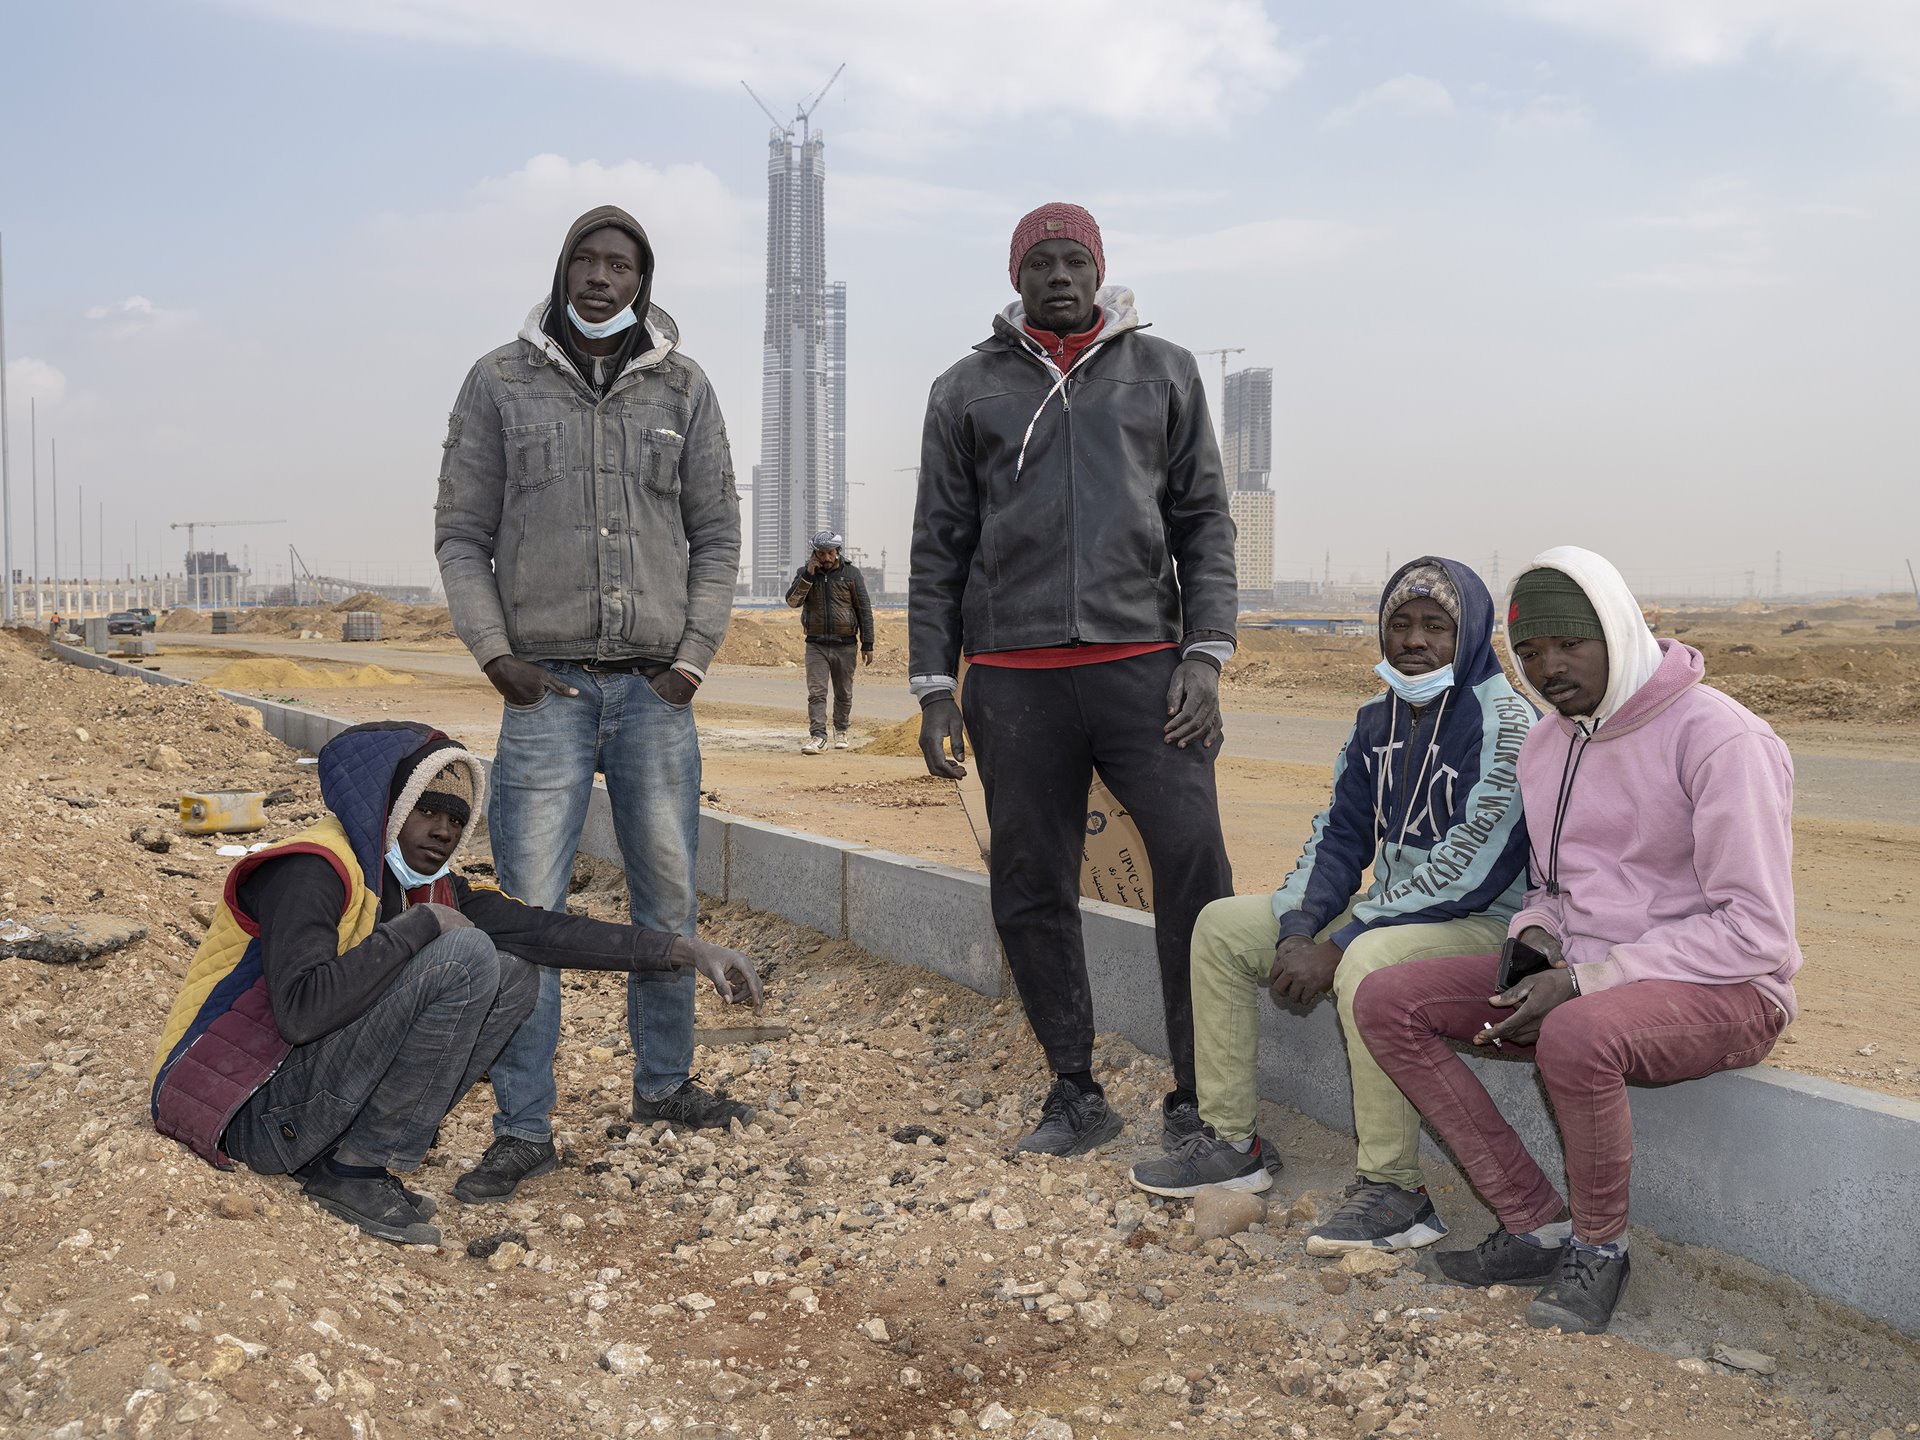 <p>Mahfouz Abib, John Madesto, Angelo Saimon, Abdel Baset Omar, and Mosab Abdel Wahab (left to right), workers from South Sudan, pose in front of the Iconic Tower rising in Egypt&rsquo;s New Administrative Capital, under construction near Cairo. An estimated two to five million people of Sudanese origin live in Egypt.</p>
